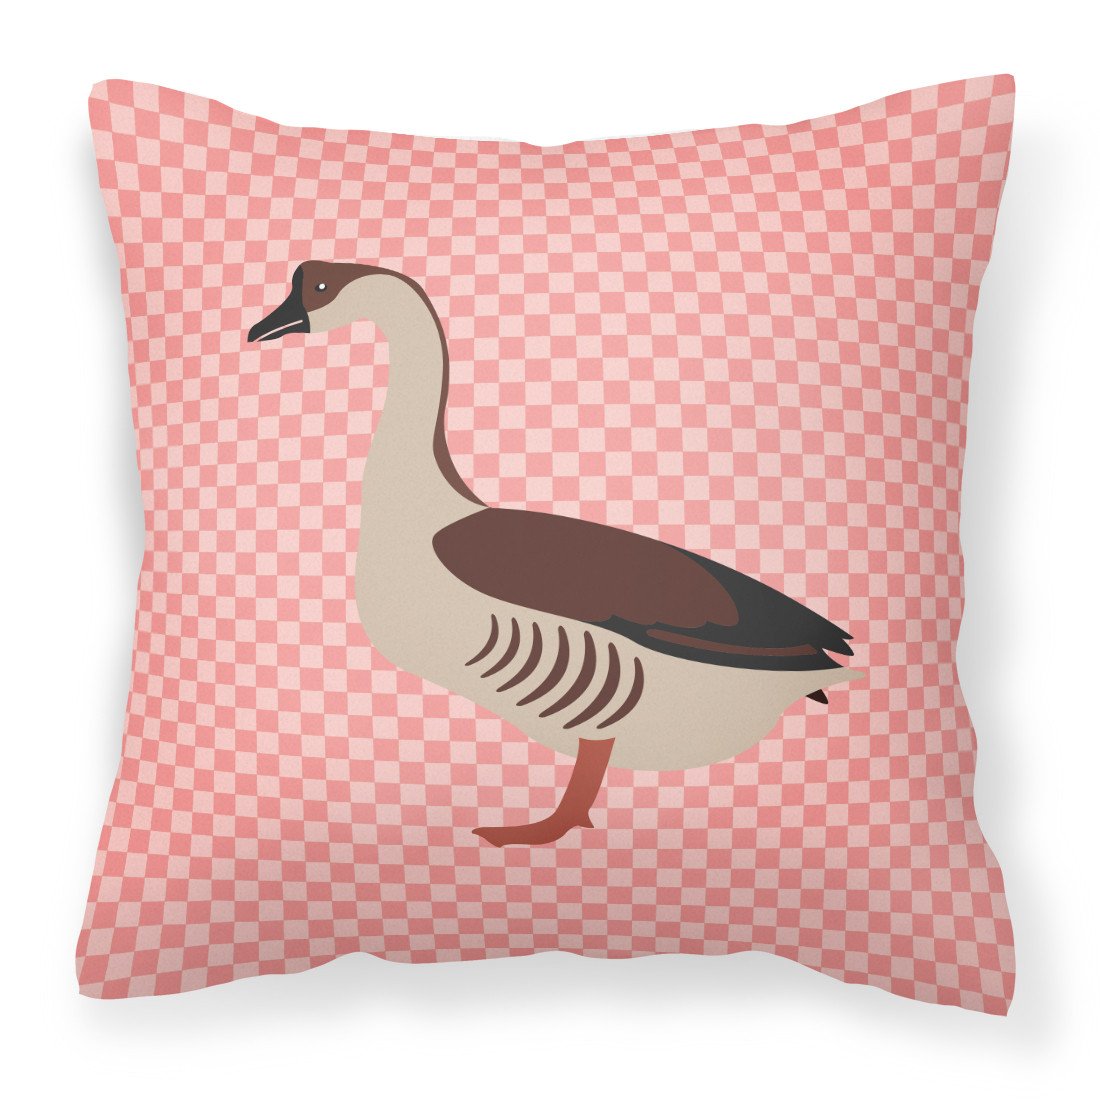 Chinese Goose Pink Check Fabric Decorative Pillow BB7896PW1818 by Caroline's Treasures